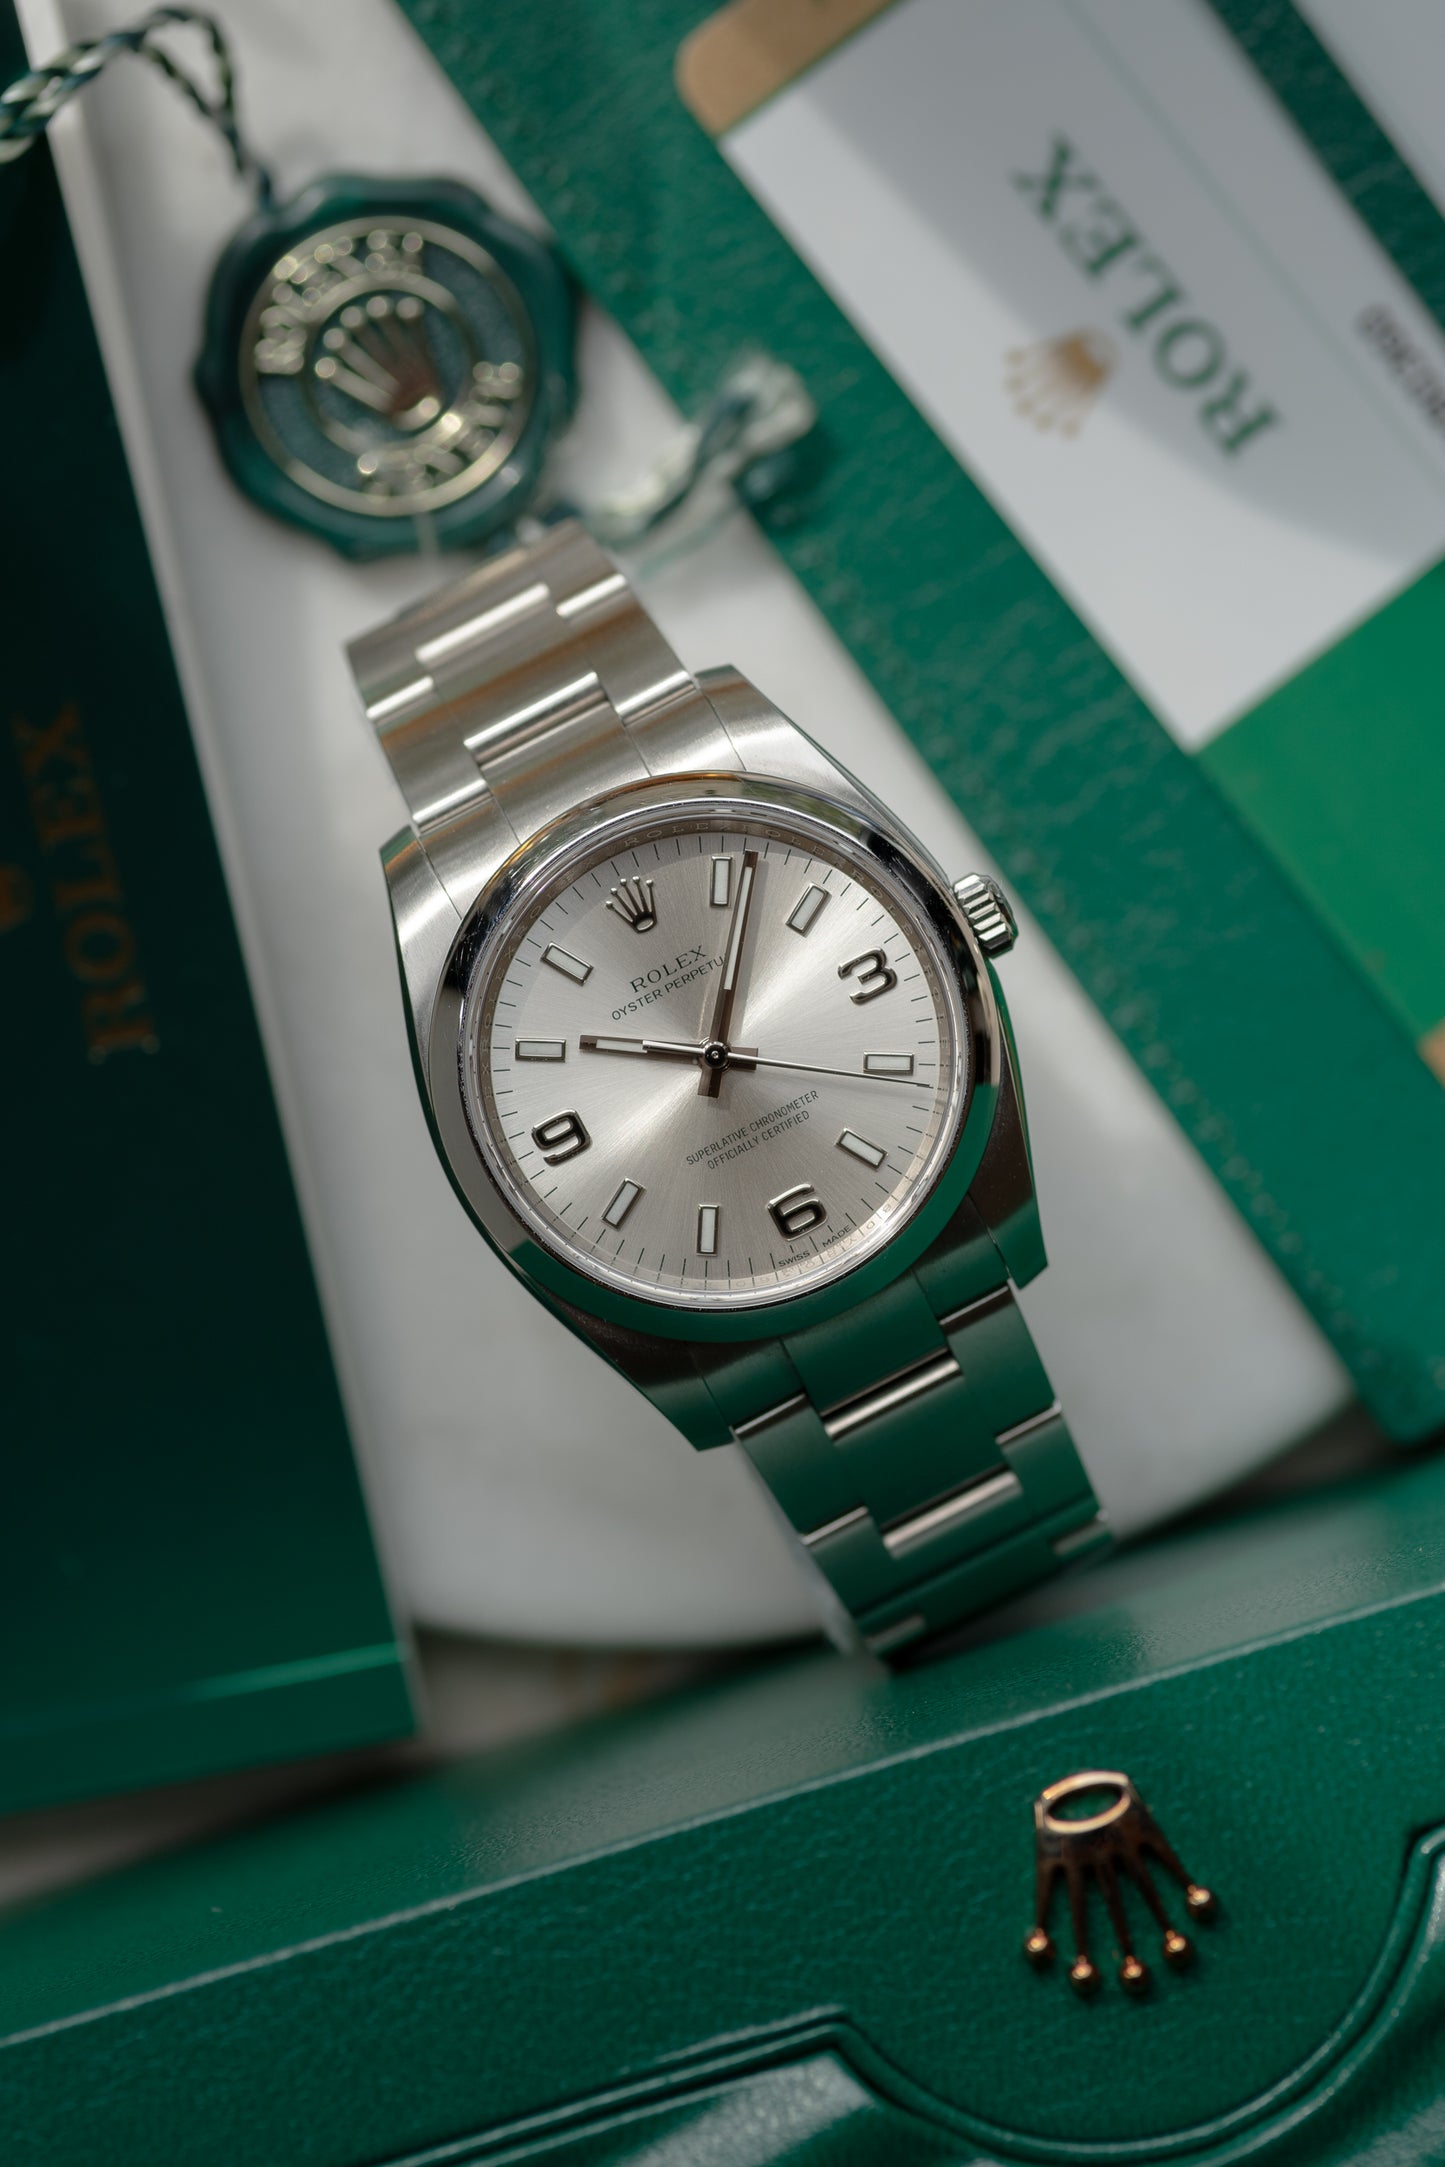 Rolex Oyster Perpetual "Air-King" Silver 369 Dial 114200 full set from 2019